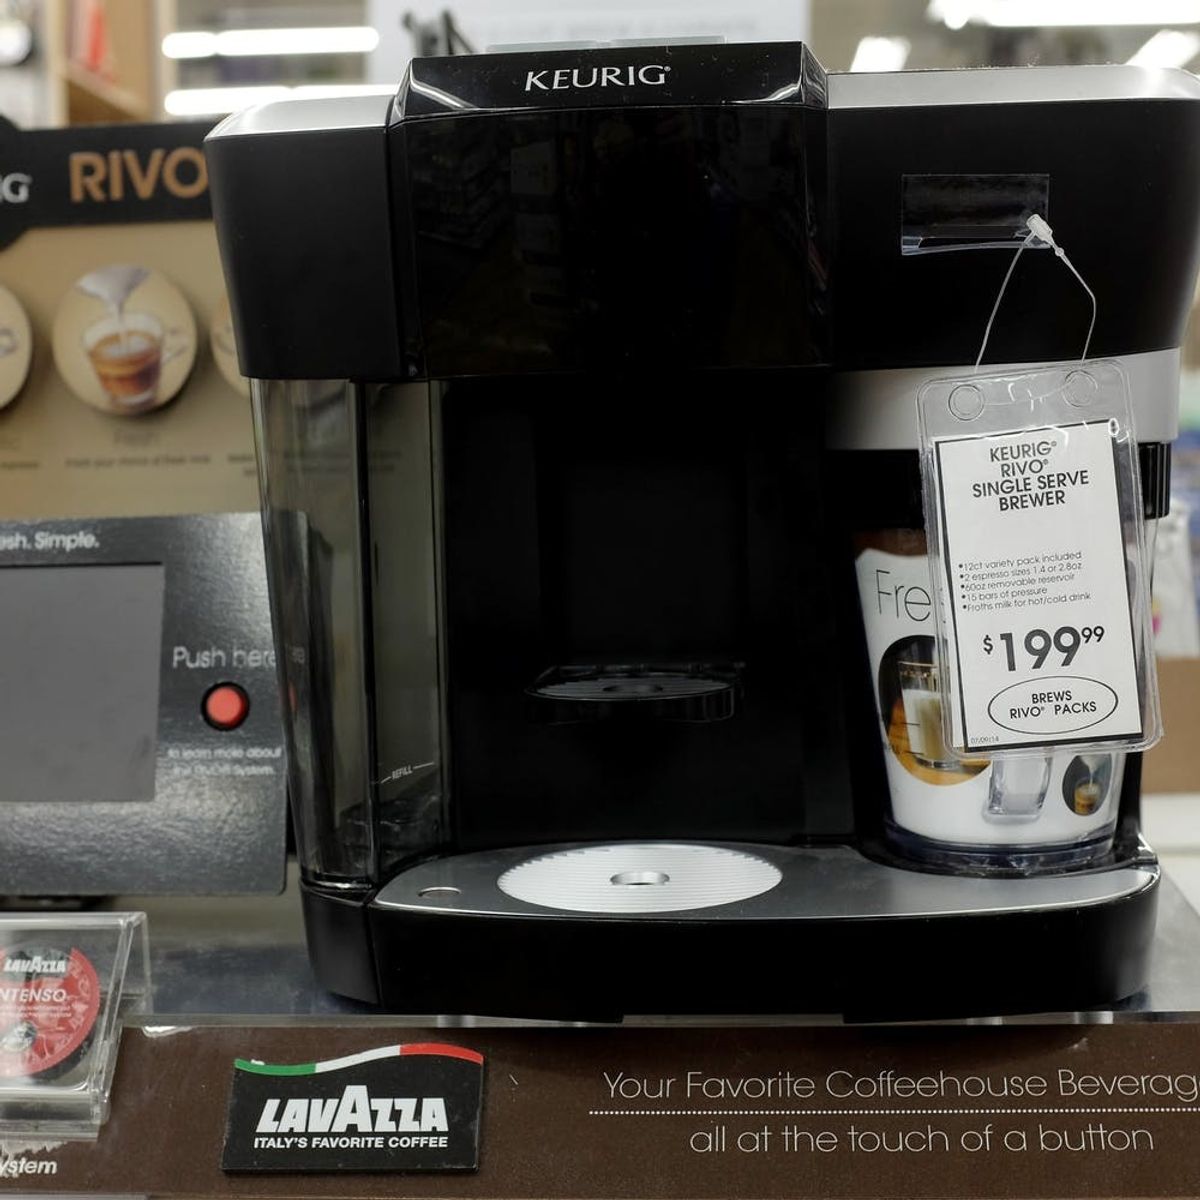 Fox Fans Smash Their Coffee Makers After Keurig Pulls Ads from Hannity Show